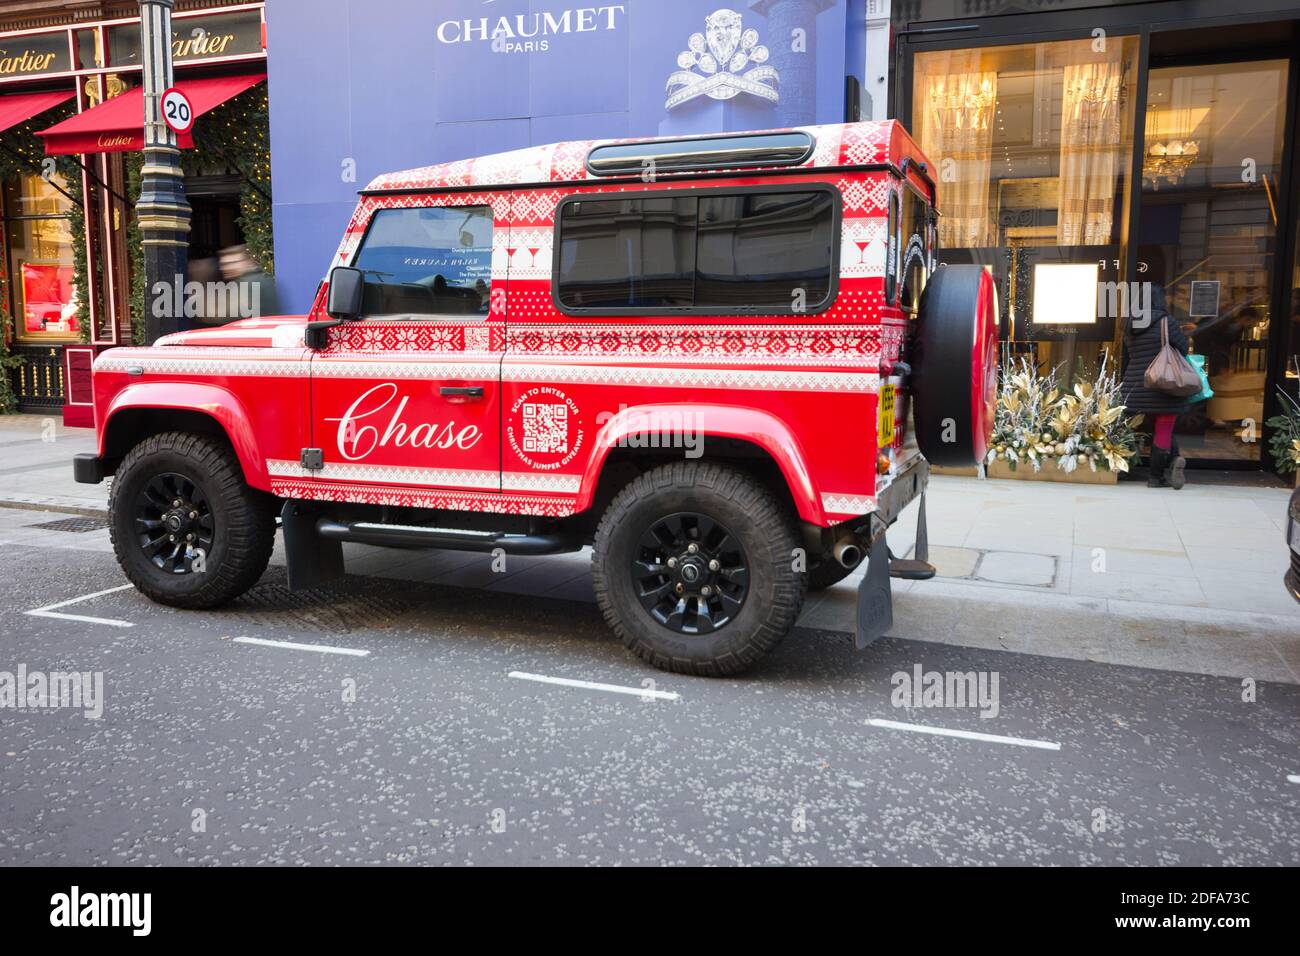 Chase jeep parked outside Chaumet store on bond street London west end with its owner picking up Christmas orders by the store entrance, England Stock Photo